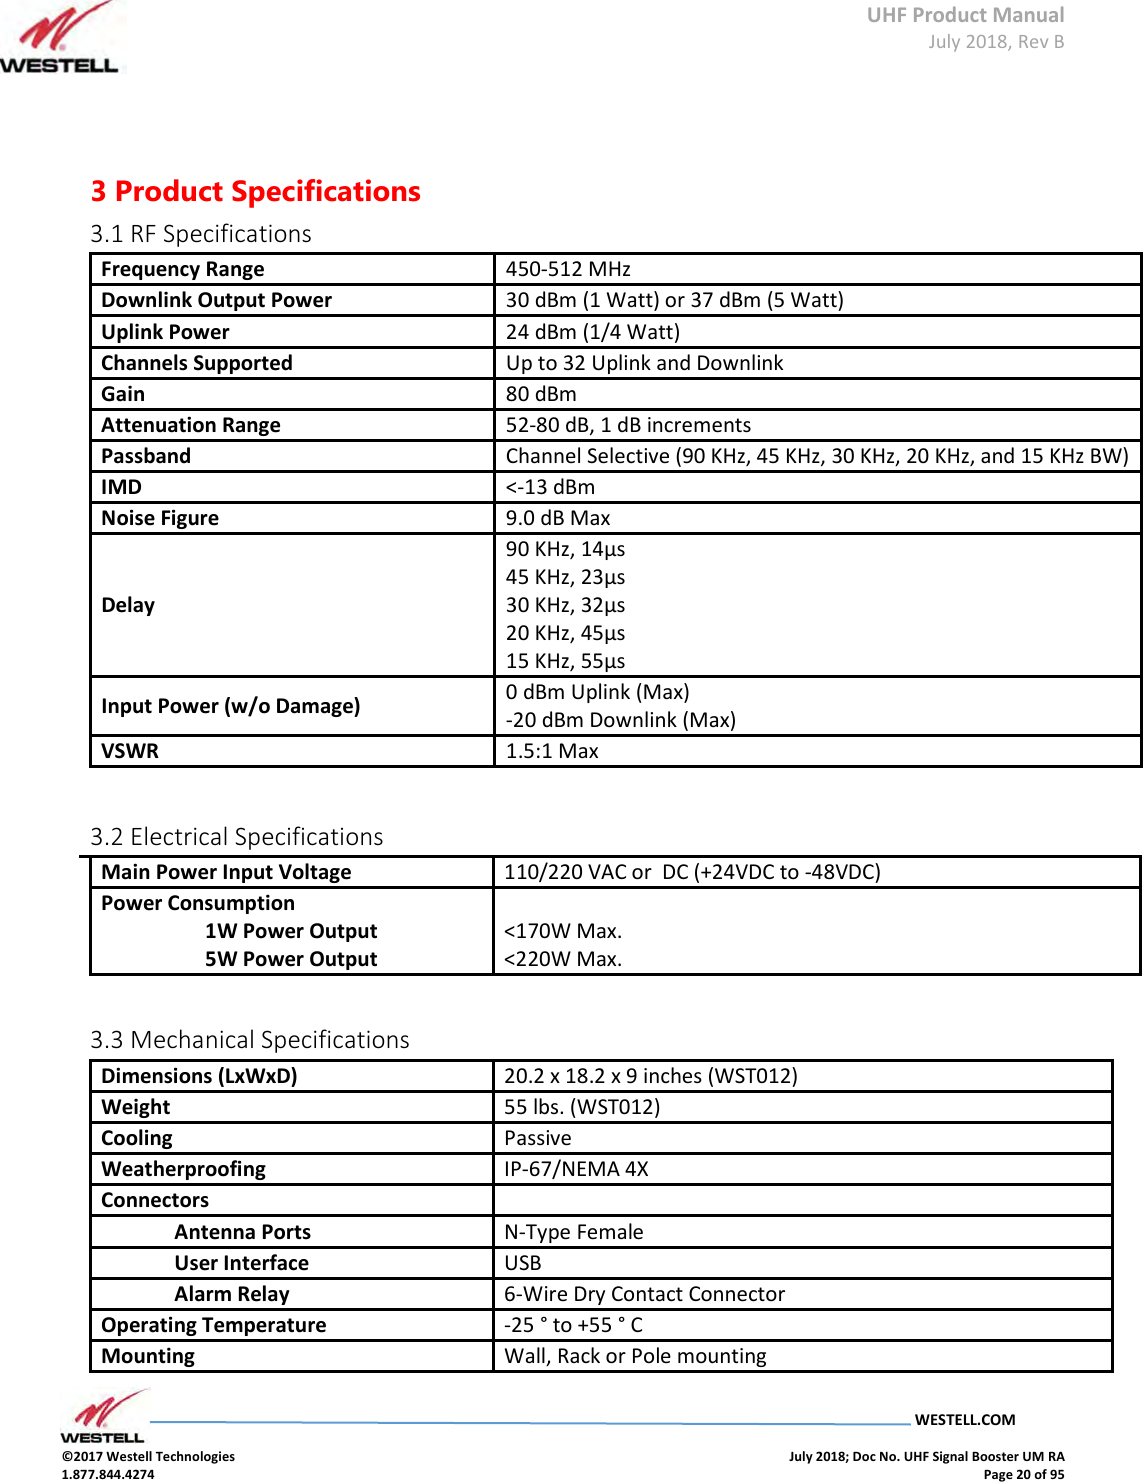 UHF Product Manual July 2018, Rev B   WESTELL.COM  ©2017 Westell Technologies    July 2018; Doc No. UHF Signal Booster UM RA 1.877.844.4274    Page 20 of 95    3 Product Specifications 3.1 RF Specifications Frequency Range 450-512 MHz Downlink Output Power  30 dBm (1 Watt) or 37 dBm (5 Watt)  Uplink Power  24 dBm (1/4 Watt)  Channels Supported  Up to 32 Uplink and Downlink  Gain  80 dBm  Attenuation Range  52-80 dB, 1 dB increments  Passband  Channel Selective (90 KHz, 45 KHz, 30 KHz, 20 KHz, and 15 KHz BW)  IMD  &lt;-13 dBm  Noise Figure  9.0 dB Max  Delay  90 KHz, 14μs  45 KHz, 23μs  30 KHz, 32μs  20 KHz, 45μs  15 KHz, 55μs  Input Power (w/o Damage)  0 dBm Uplink (Max)  -20 dBm Downlink (Max)  VSWR  1.5:1 Max   3.2 Electrical Specifications Specification  Main Power Input Voltage  110/220 VAC or  DC (+24VDC to -48VDC) Power Consumption  1W Power Output 5W Power Output  &lt;170W Max.  &lt;220W Max.  3.3 Mechanical Specifications Dimensions (LxWxD)  20.2 x 18.2 x 9 inches (WST012) Weight  55 lbs. (WST012) Cooling  Passive  Weatherproofing  IP-67/NEMA 4X  Connectors  Antenna Ports  N-Type Female  User Interface  USB  Alarm Relay  6-Wire Dry Contact Connector  Operating Temperature  -25 ° to +55 ° C  Mounting  Wall, Rack or Pole mounting   